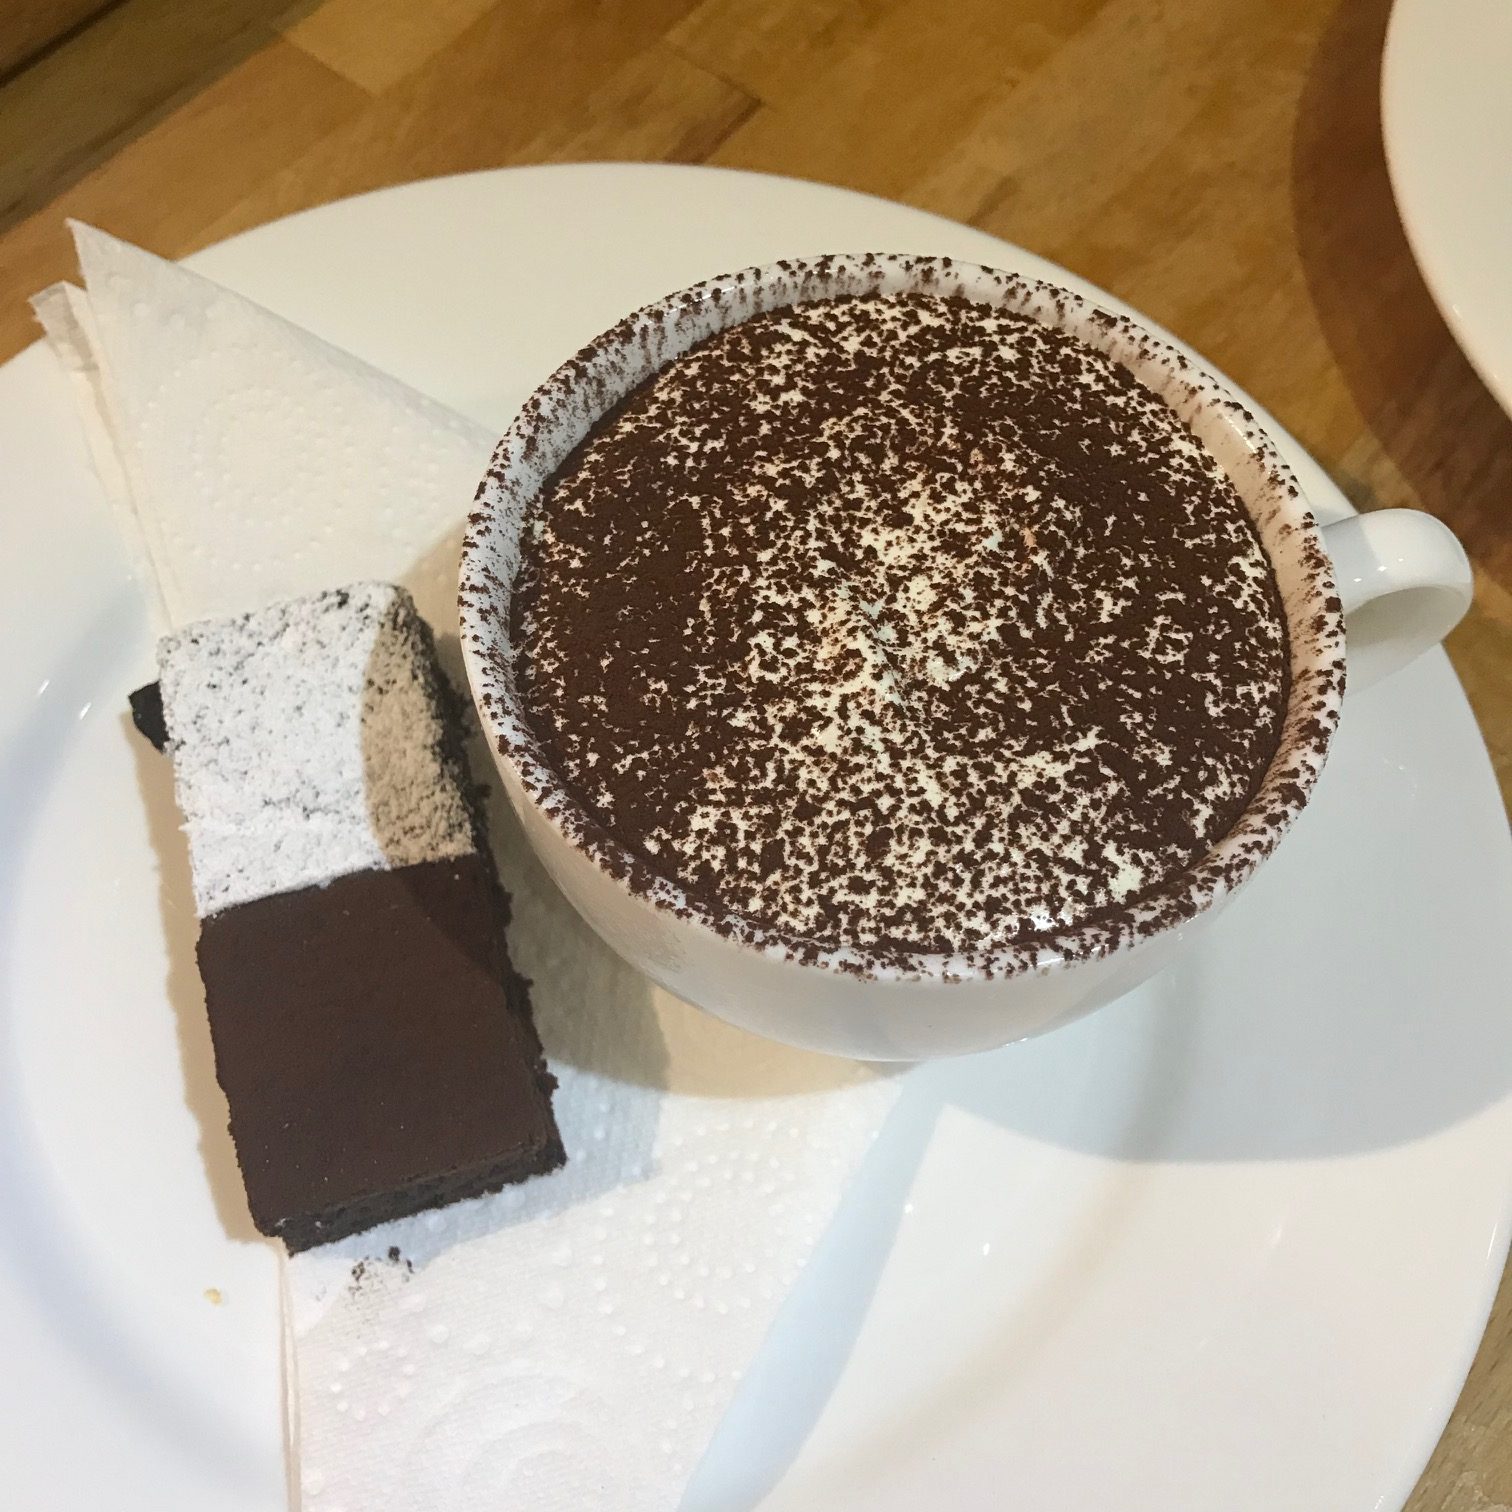 20190829 - Cappuccino Mousse with Chocolate Brownie